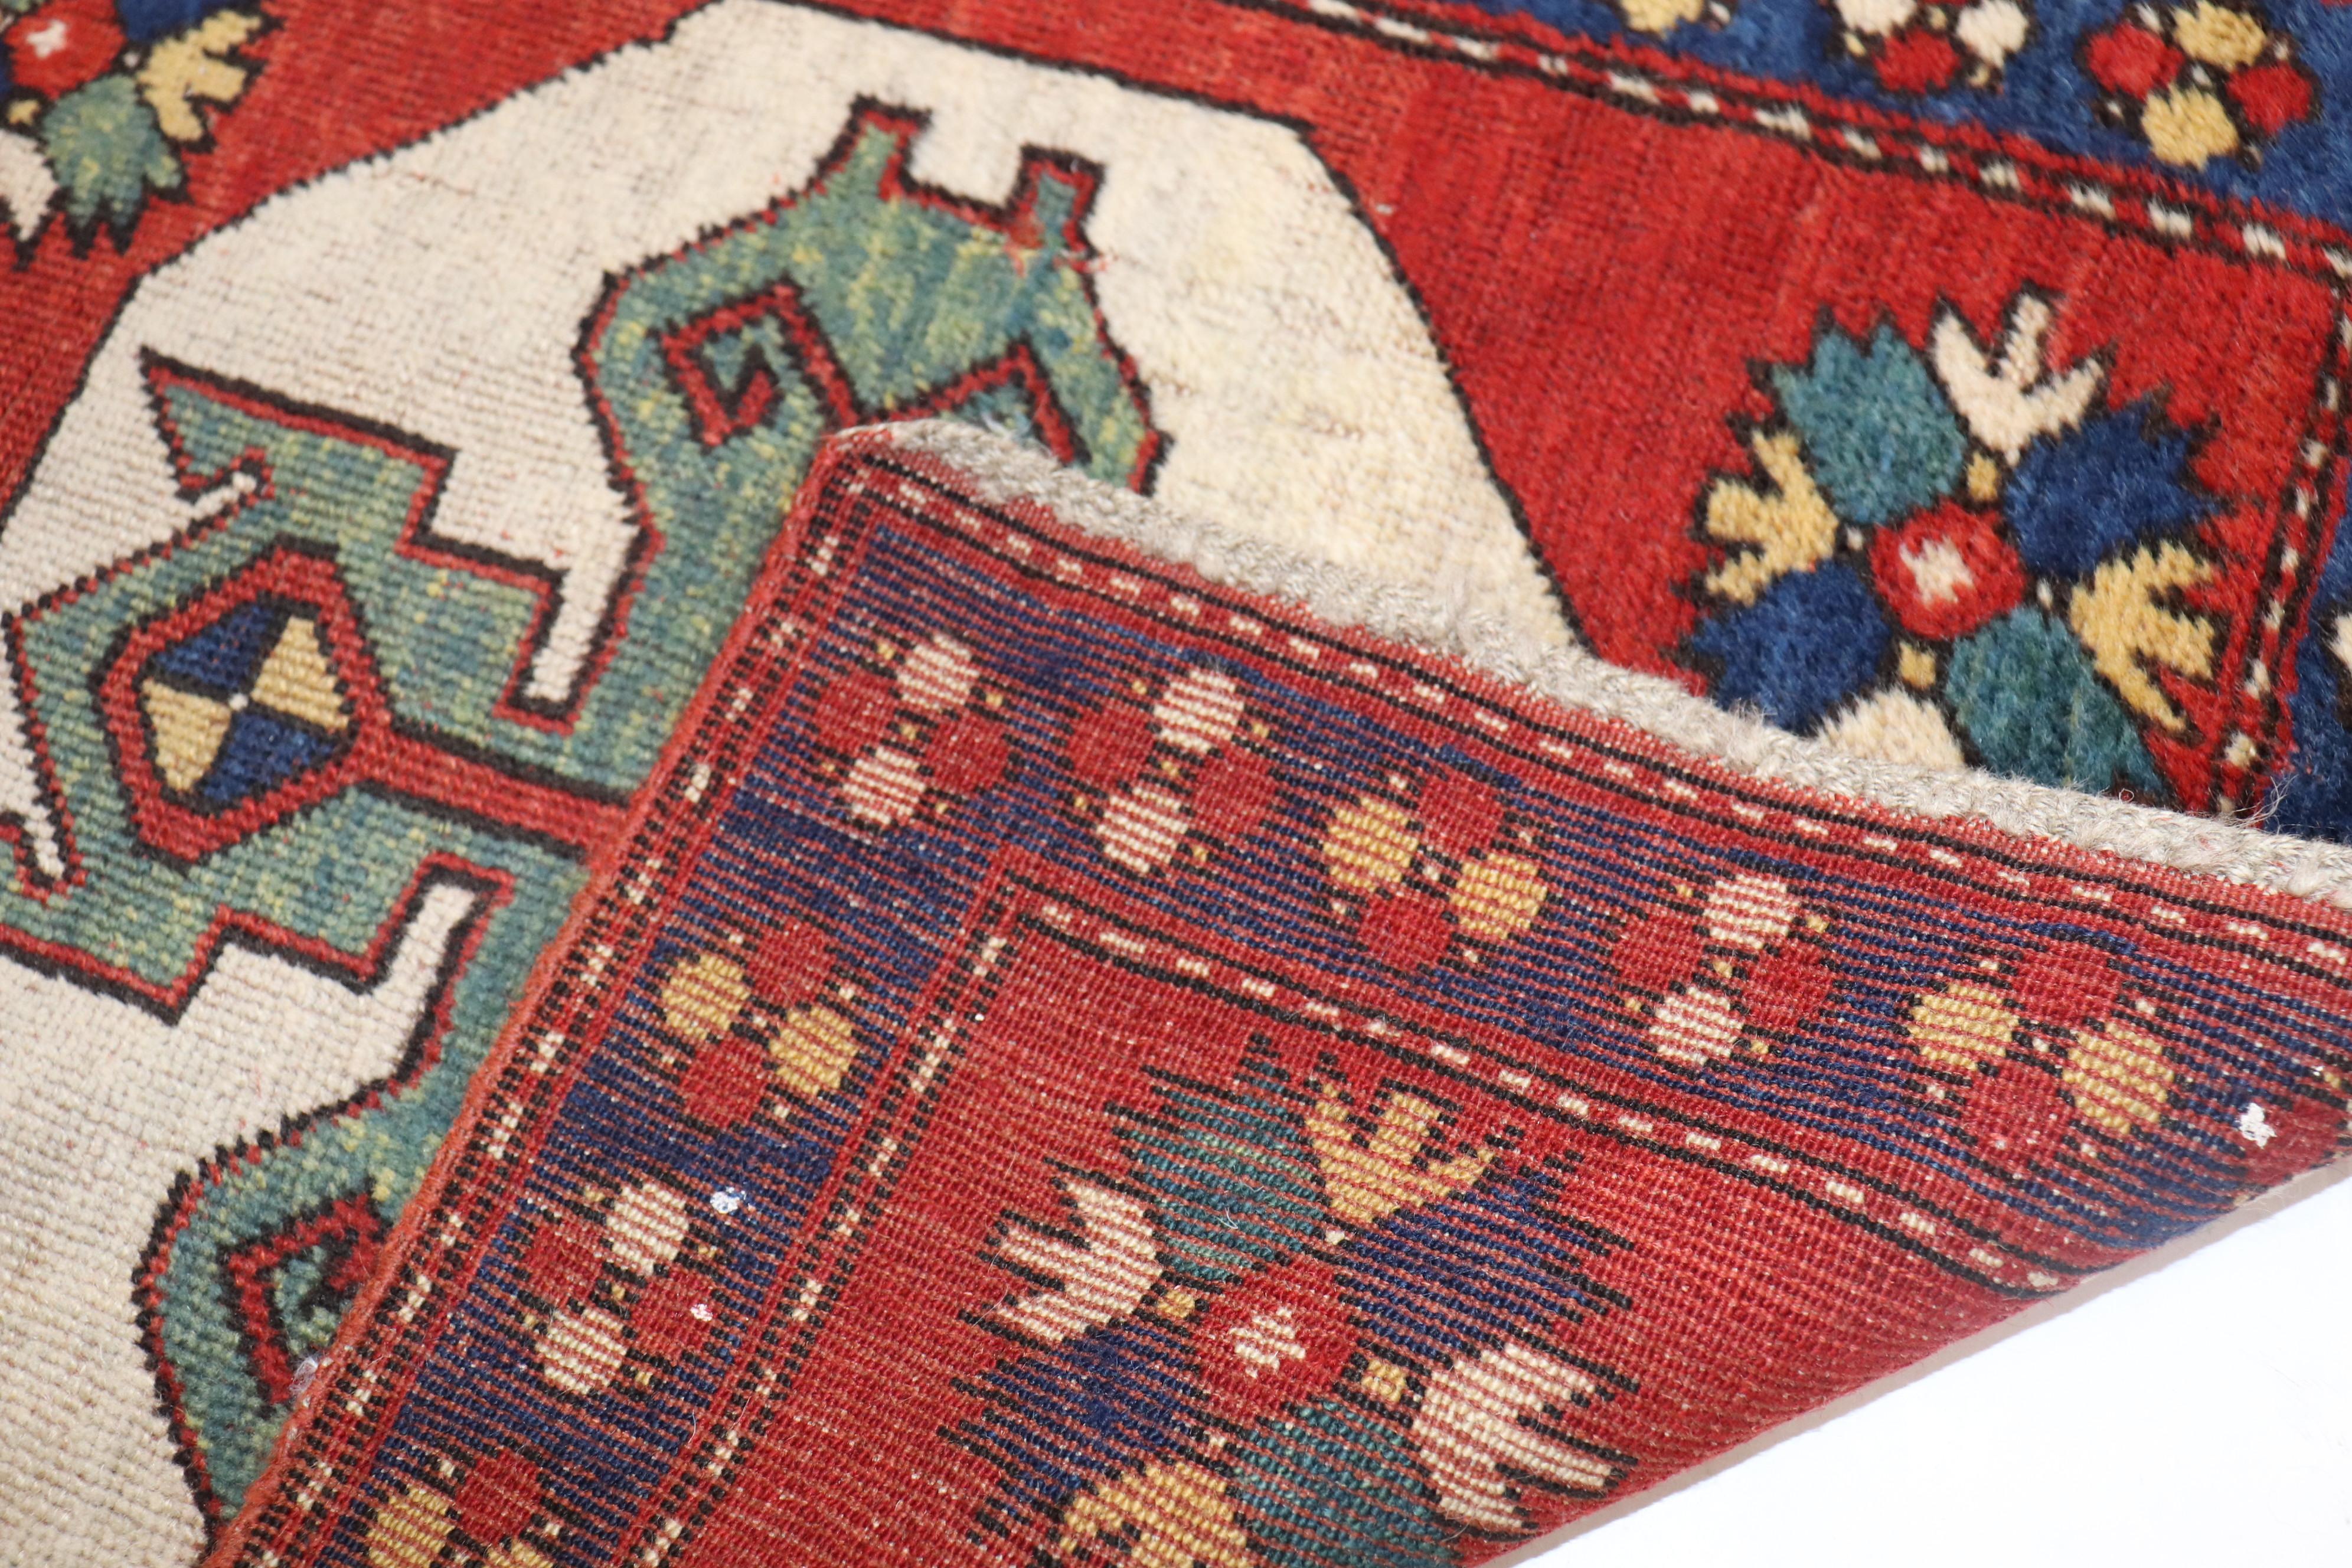 An early 20th century Caucasian Kazak rug with a geometric motif on a red ground. The size is original

Measures: 1'8” x 2'1”.

